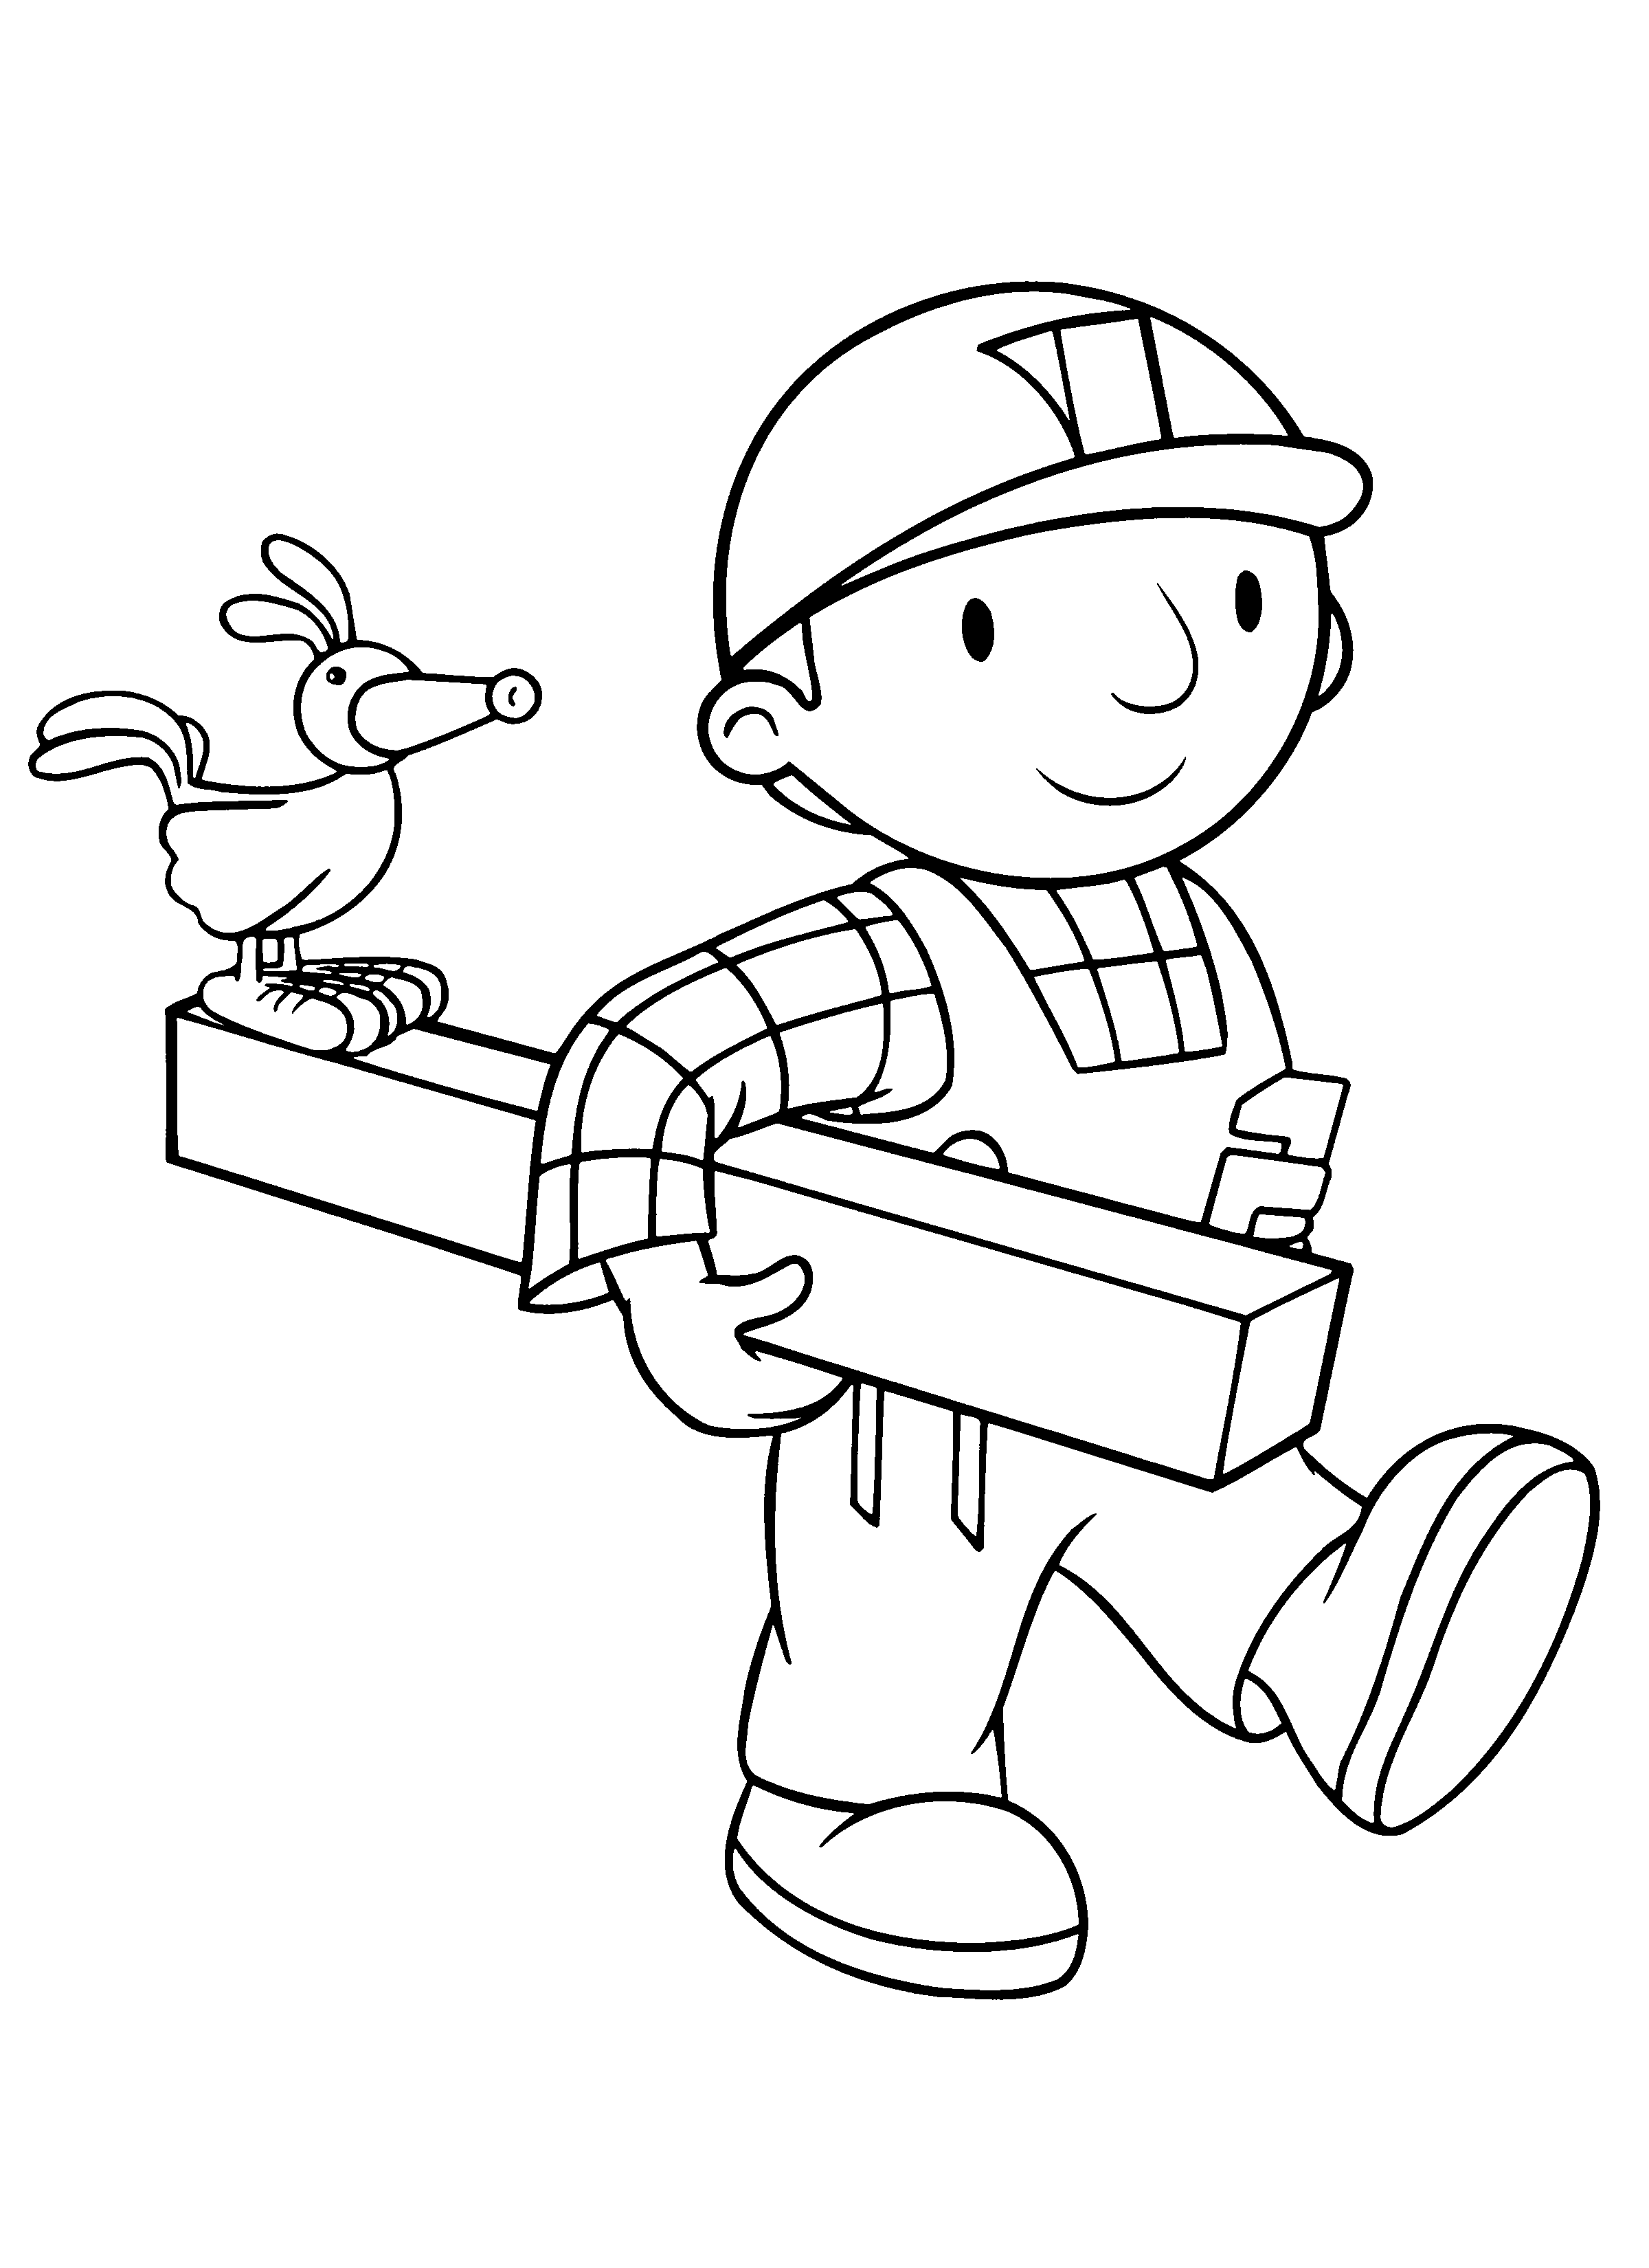 Bob The Builder Coloring Pages Printable